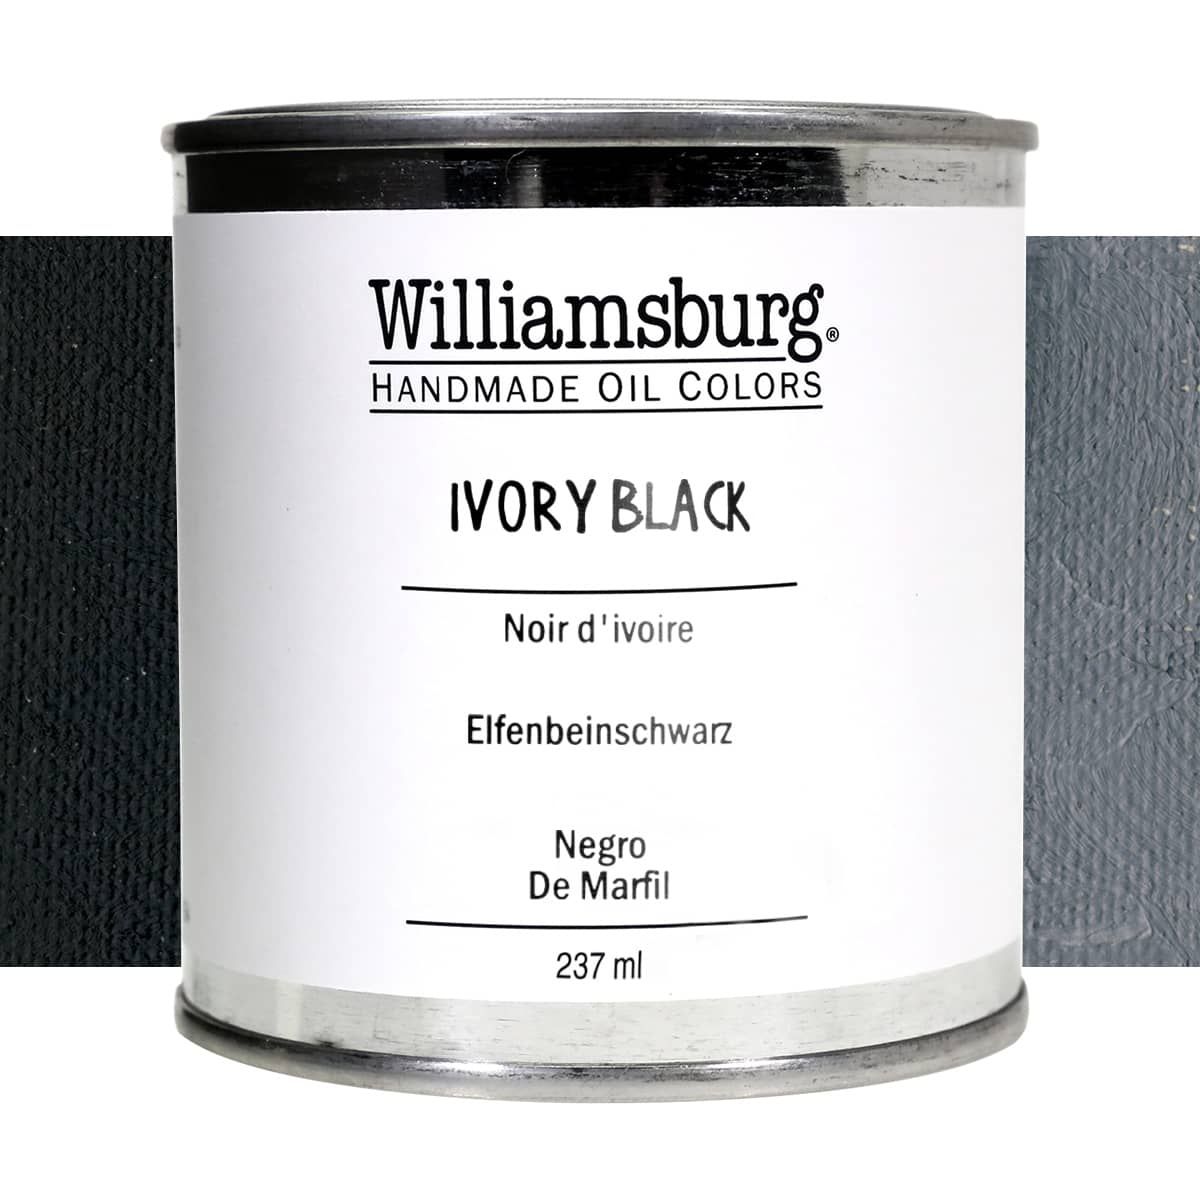 Williamsburg Oil Color 237 ml Can Ivory Black